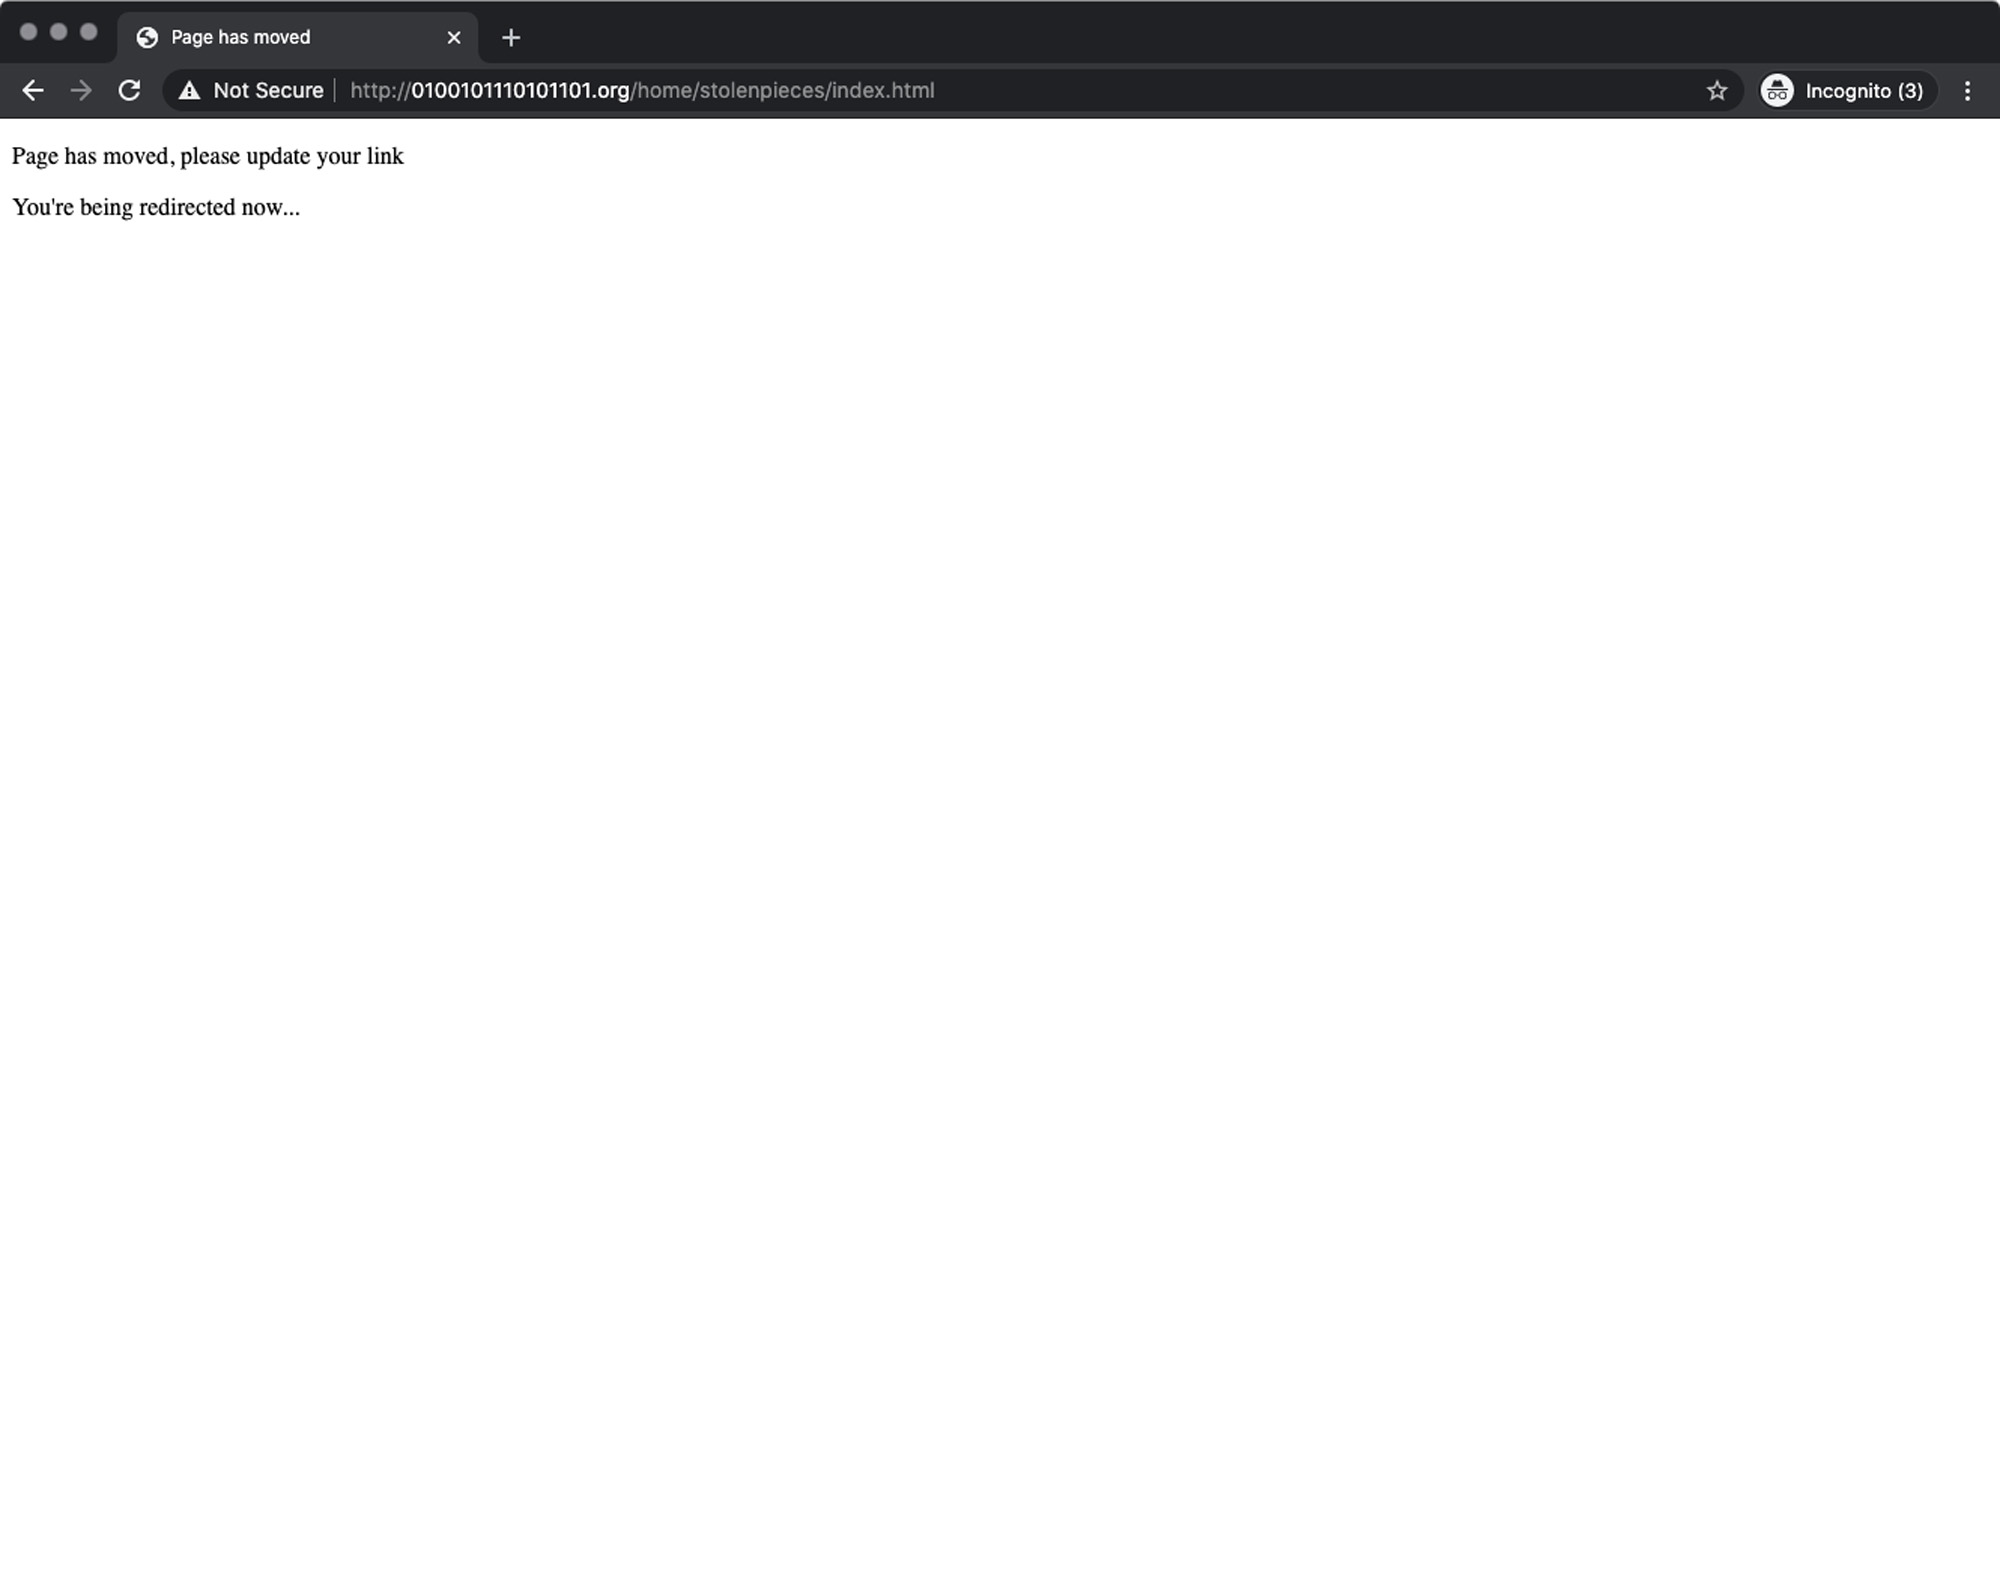 Screenshot of a webpage with a redirect error